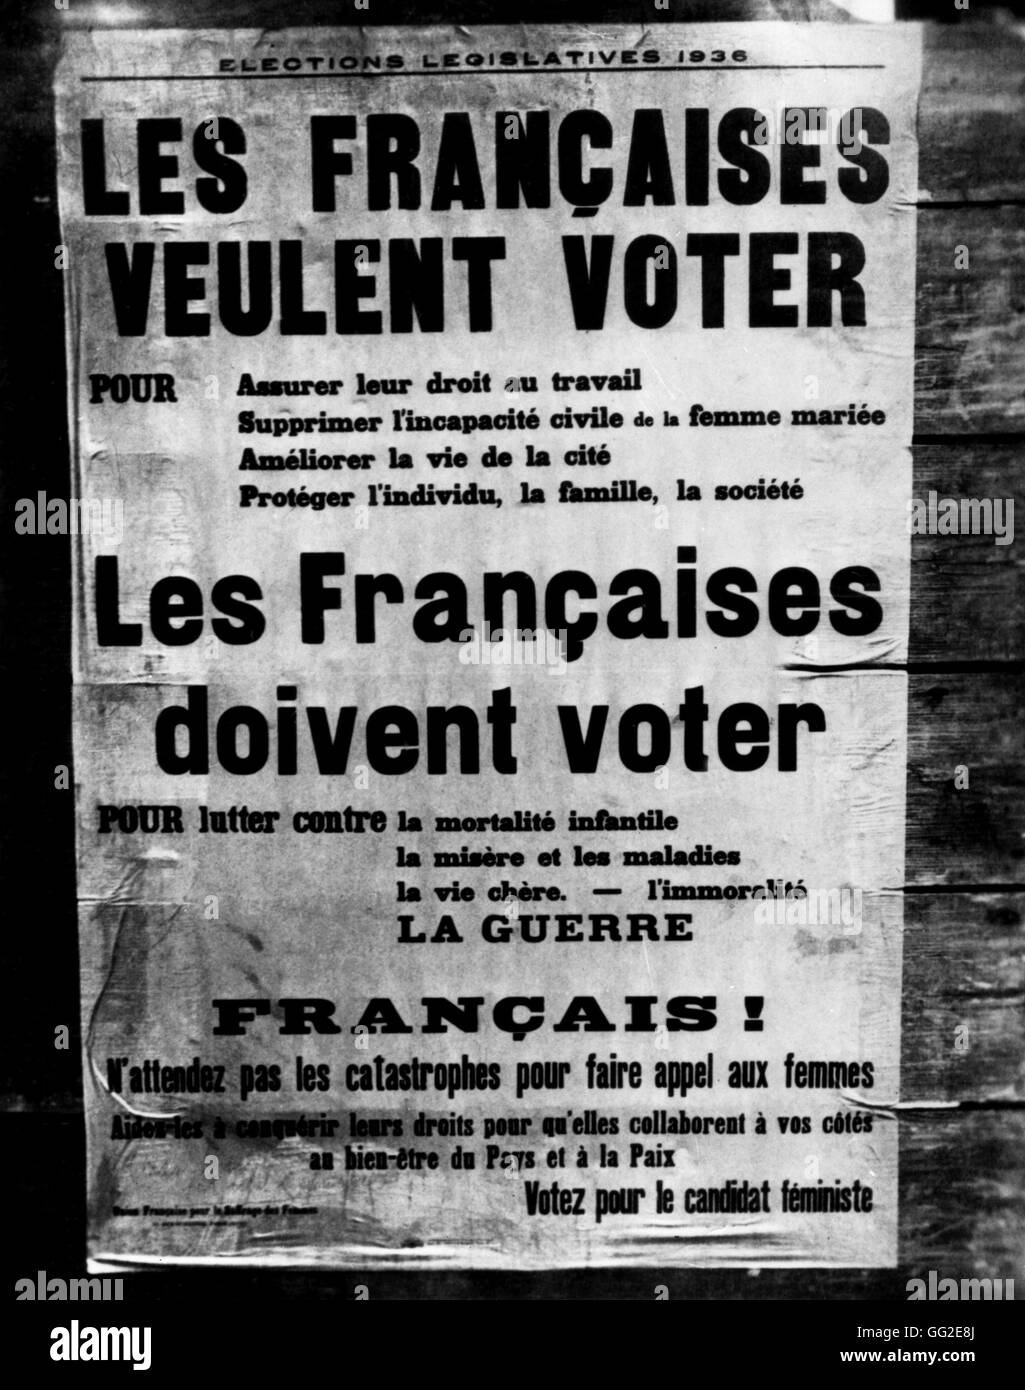 Electoral poster calling for women's suffrage in France. April 30, 1936 Stock Photo